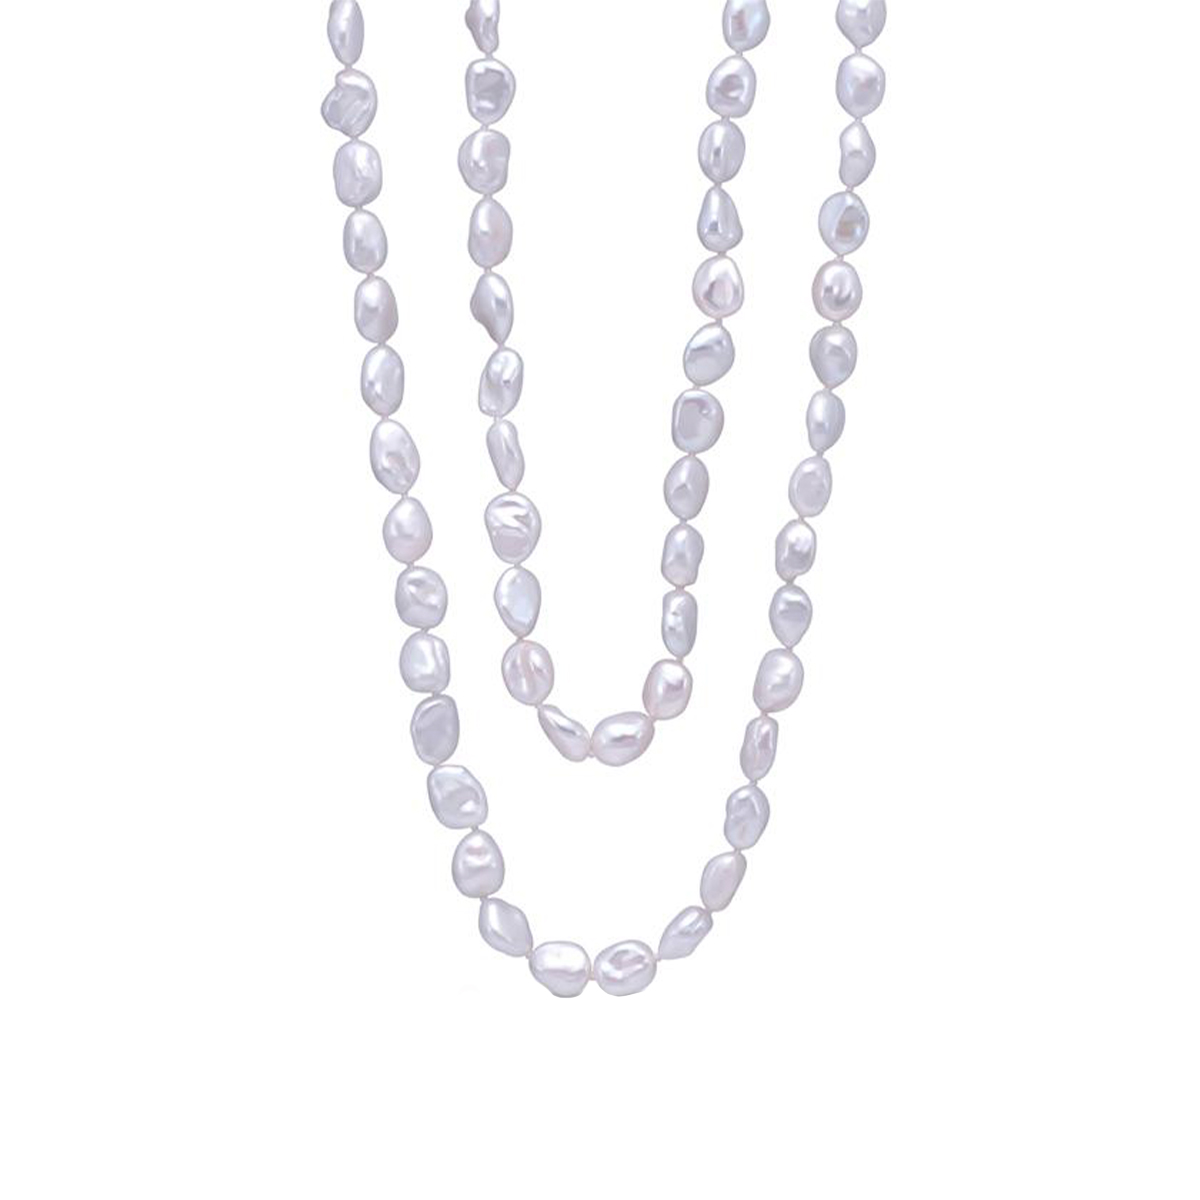 54-Inch Freshwater Keshi Pearl Necklace